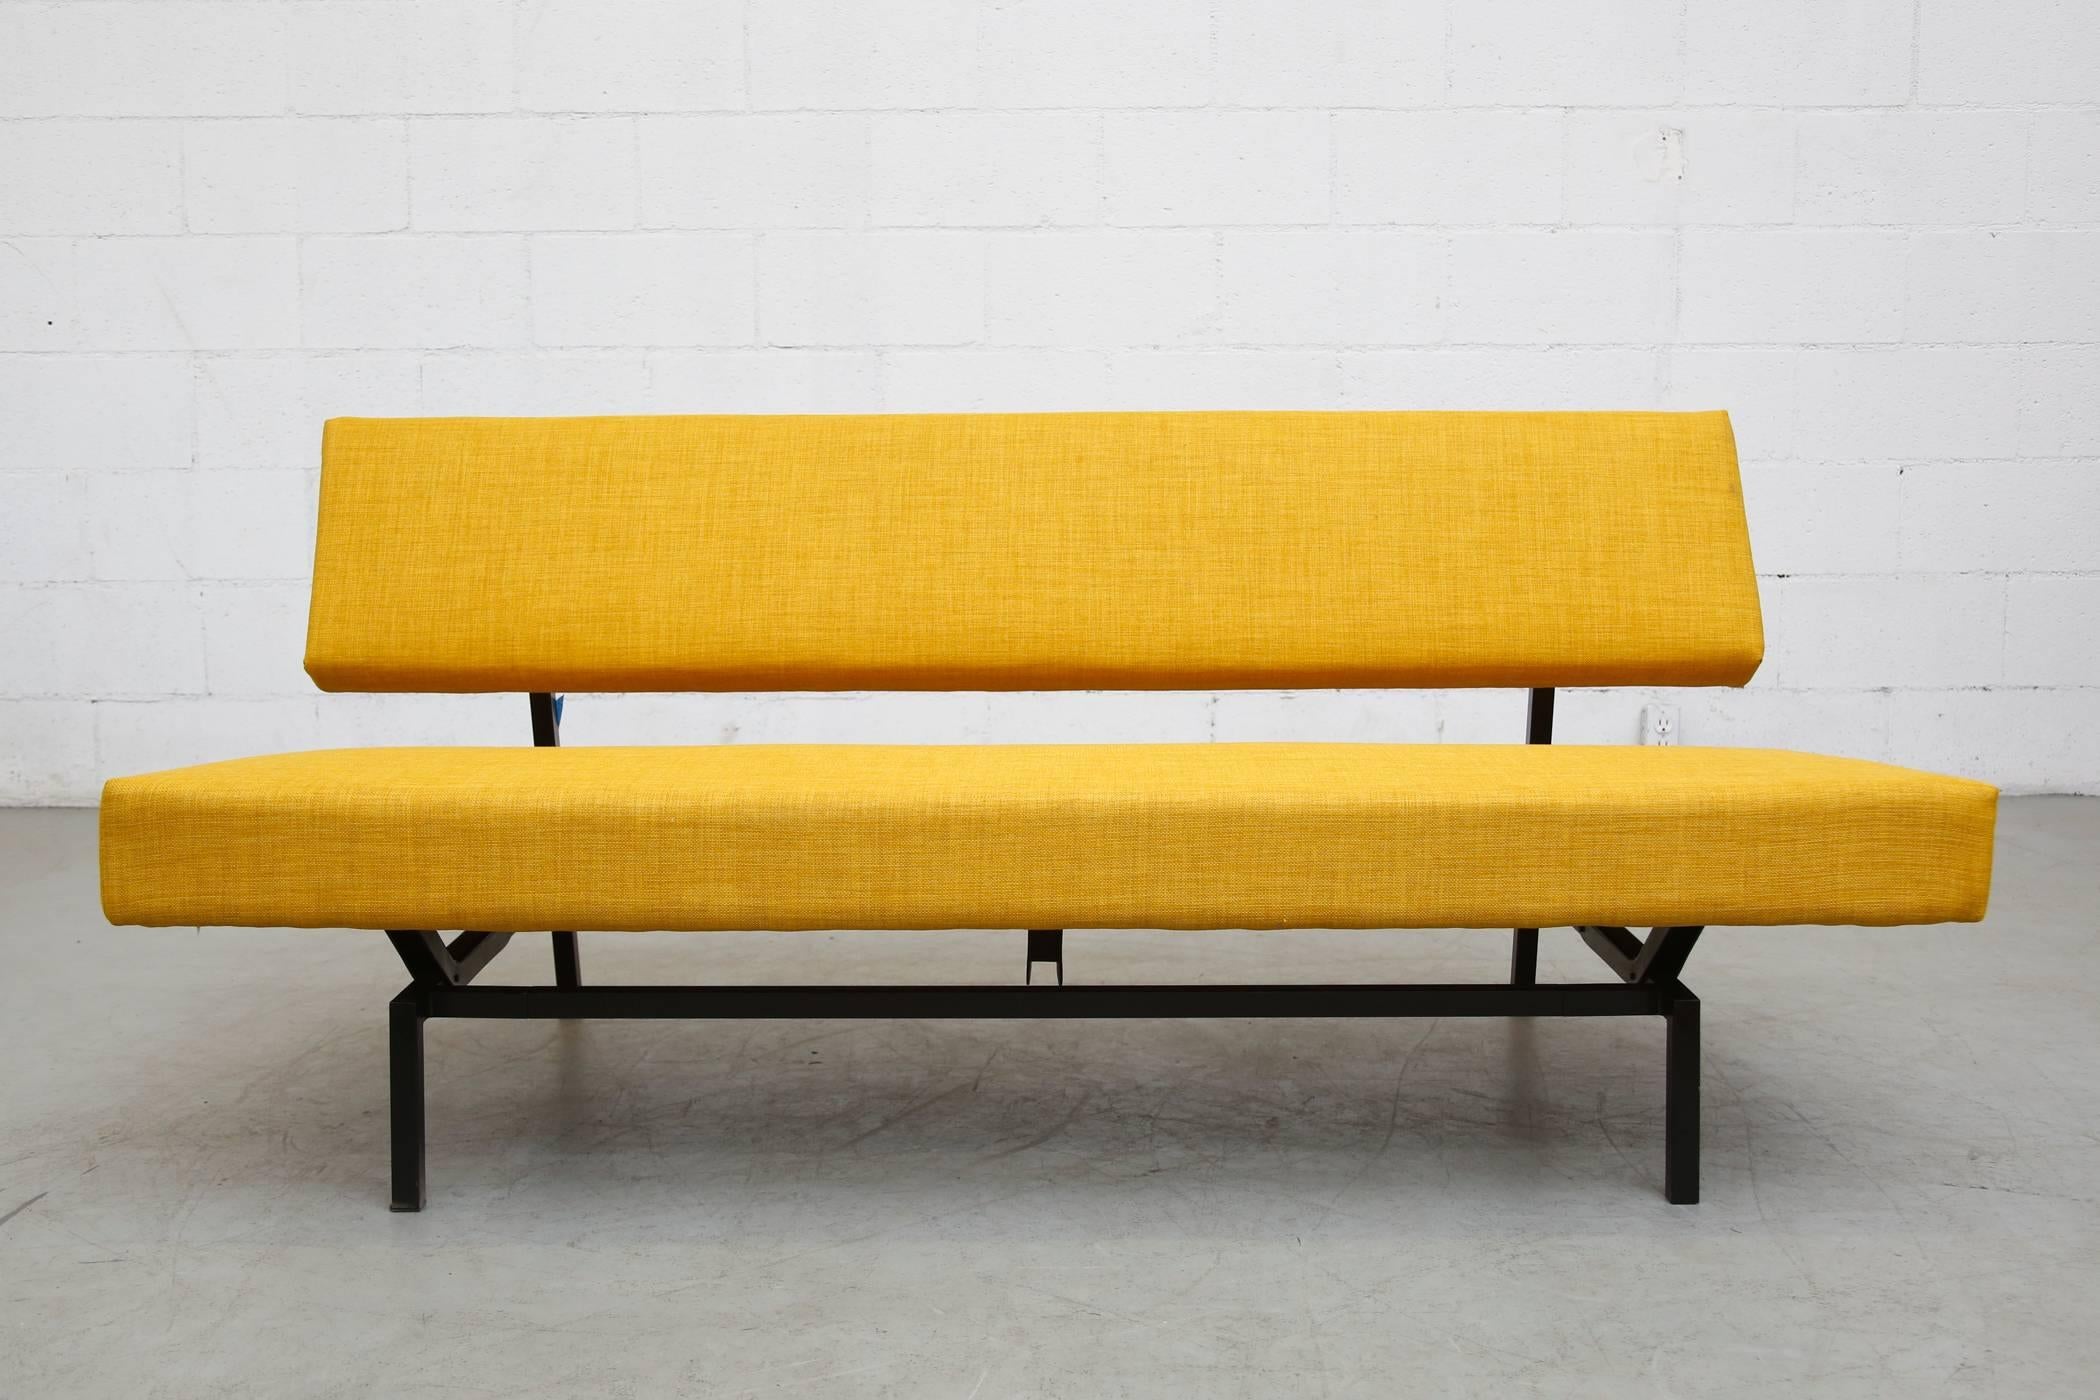 Streamline Martin Visser Style Sofa for 't spectrum newly re-upholstered in bright yellow. Some wear to frame consistent with age and use.